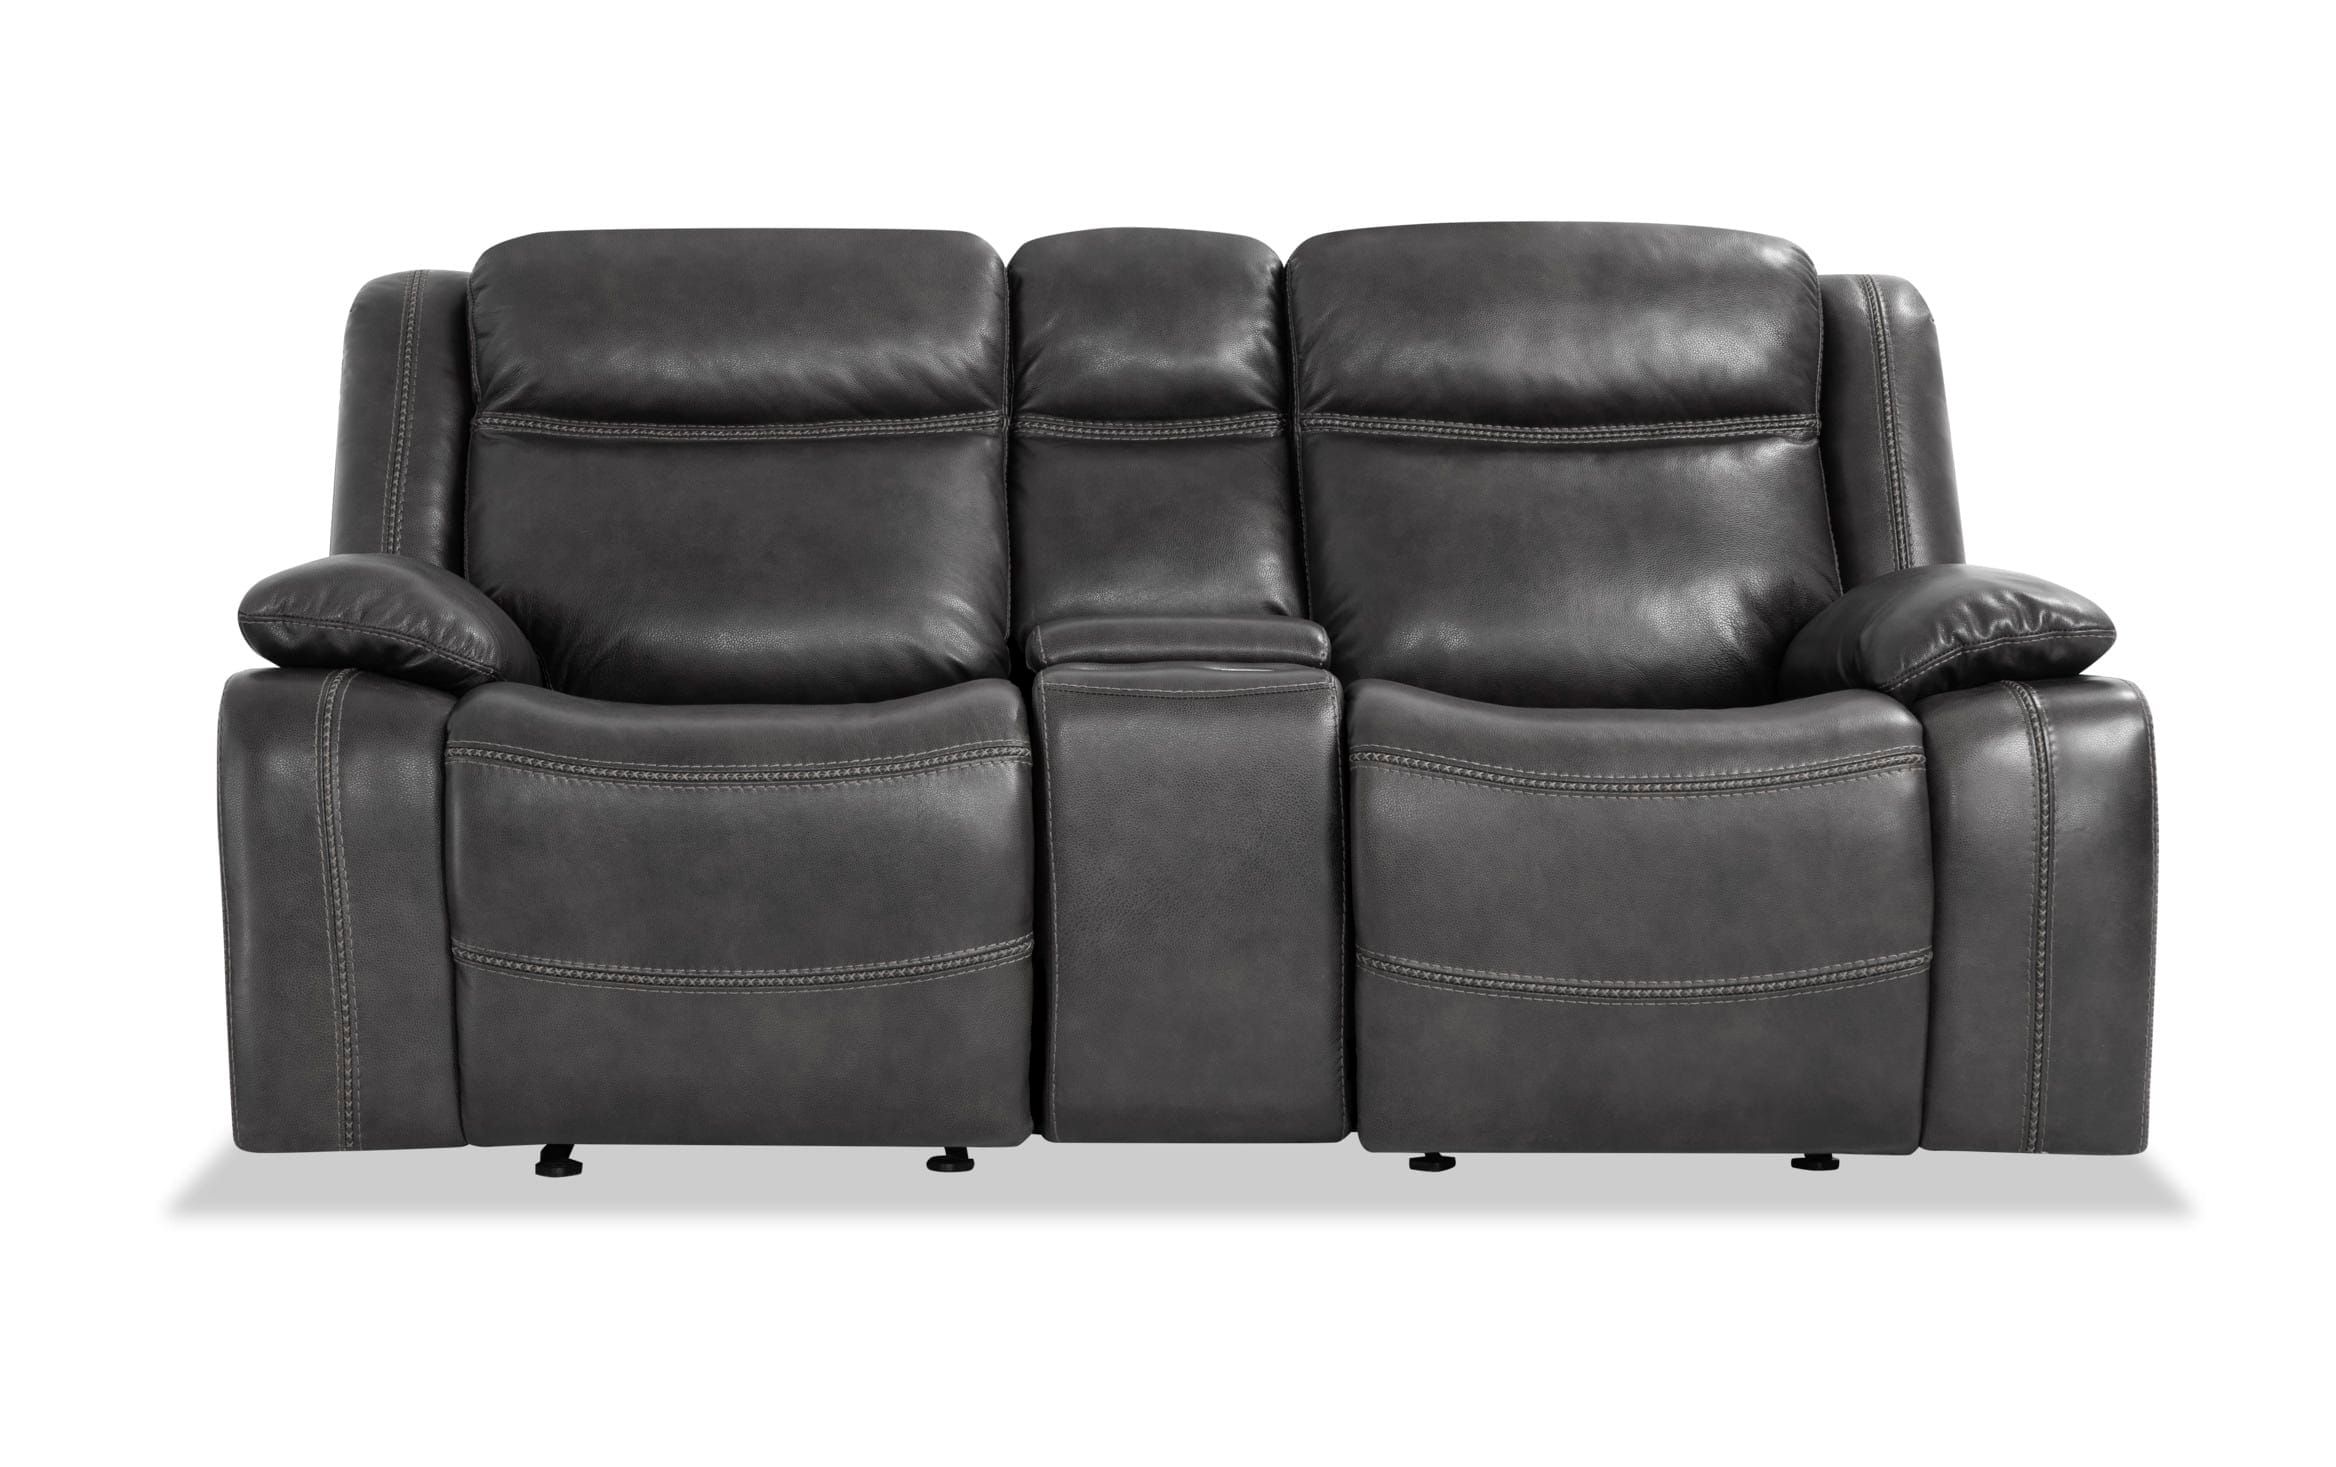 Olympus Gray Leather Power Reclining Loveseat Bob S For Trailblazer Gray Leather Power Reclining Sofas (View 1 of 15)